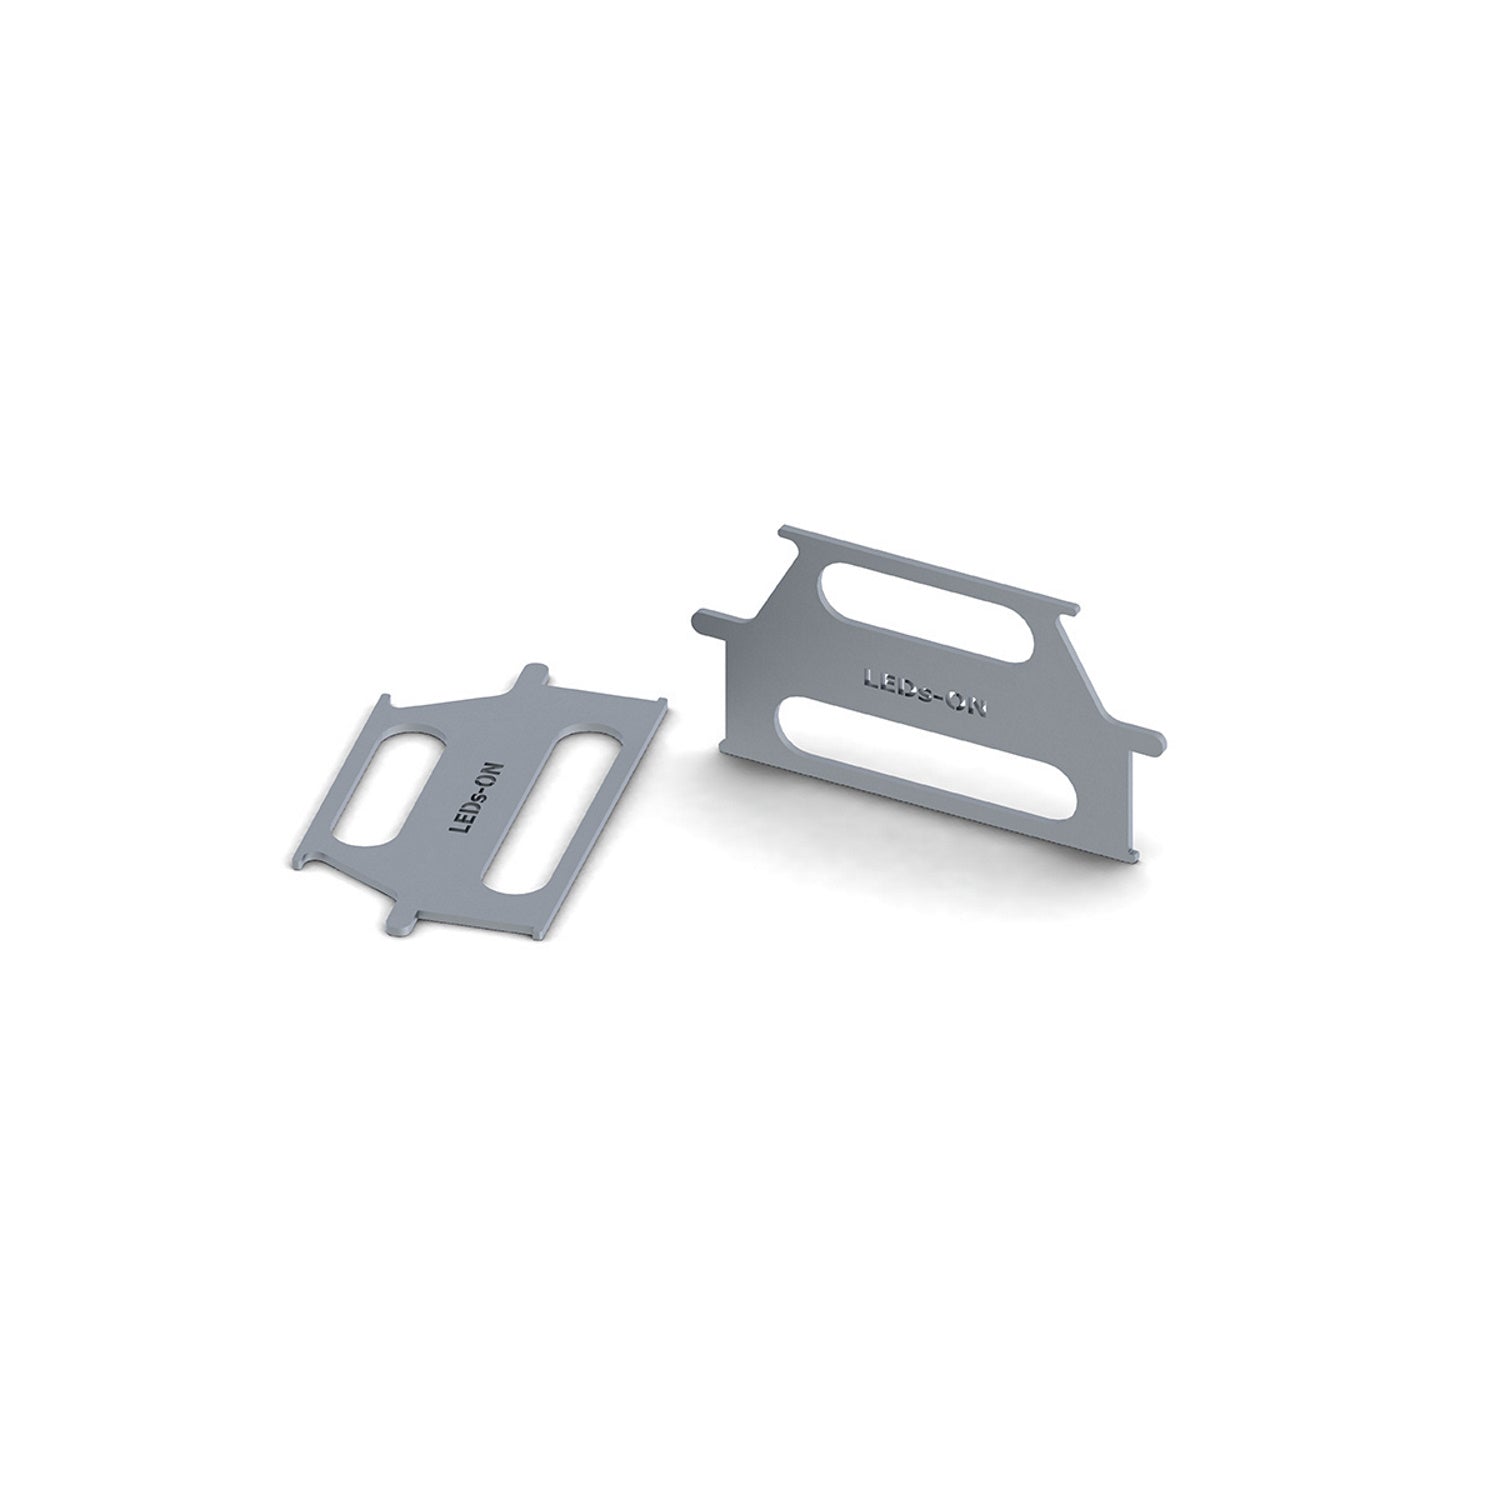 Positioning key for trimless base installation for SPLW116 led profile